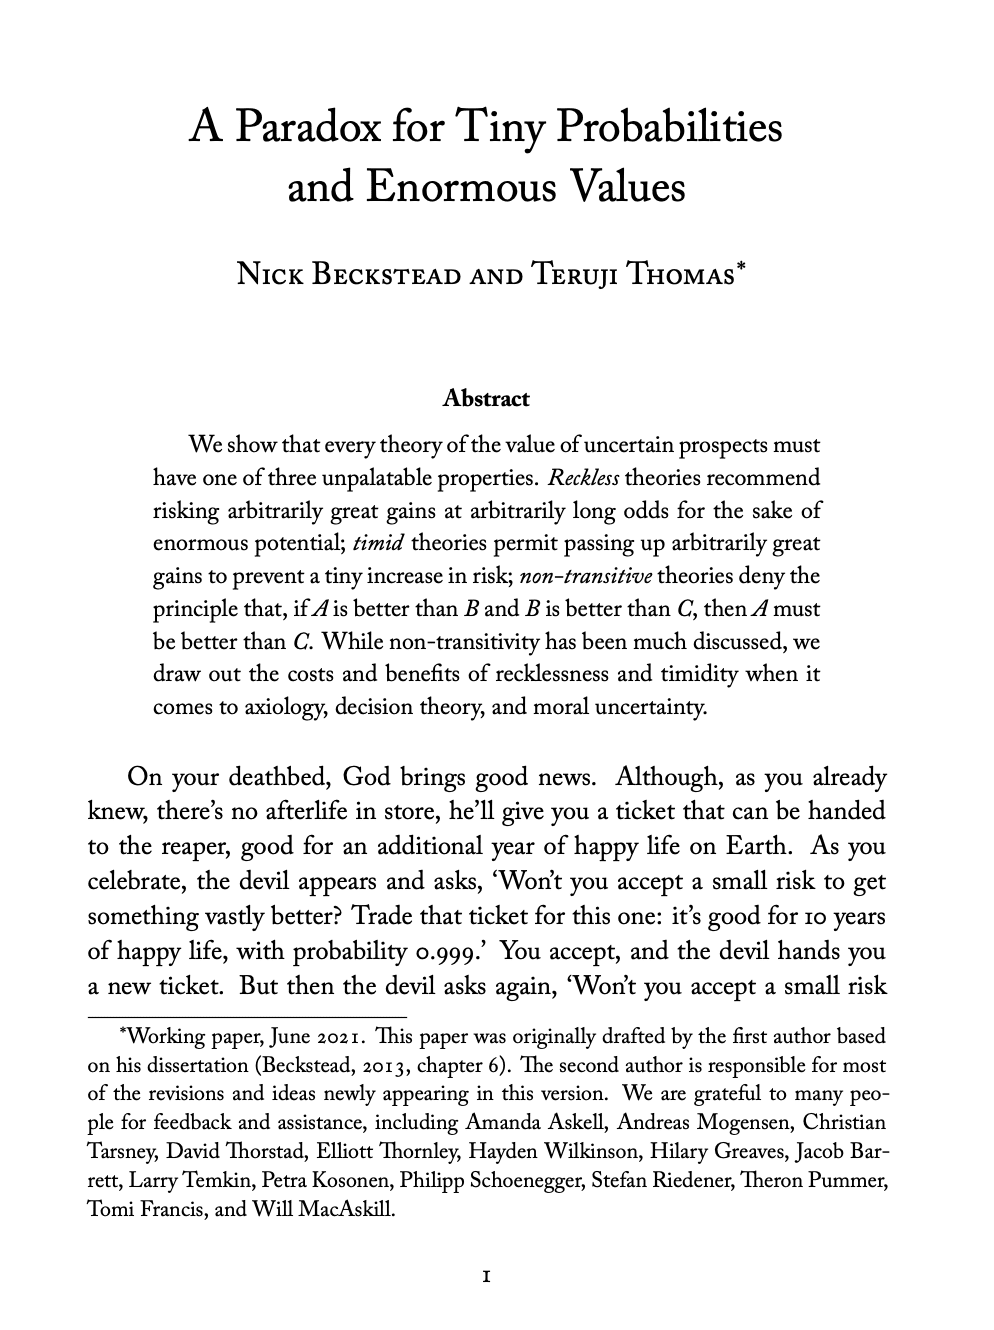 Beckstead-Thomas - Recklessness-A Paradox for Tiny Probabilities and Enormous Values Version 2 cover